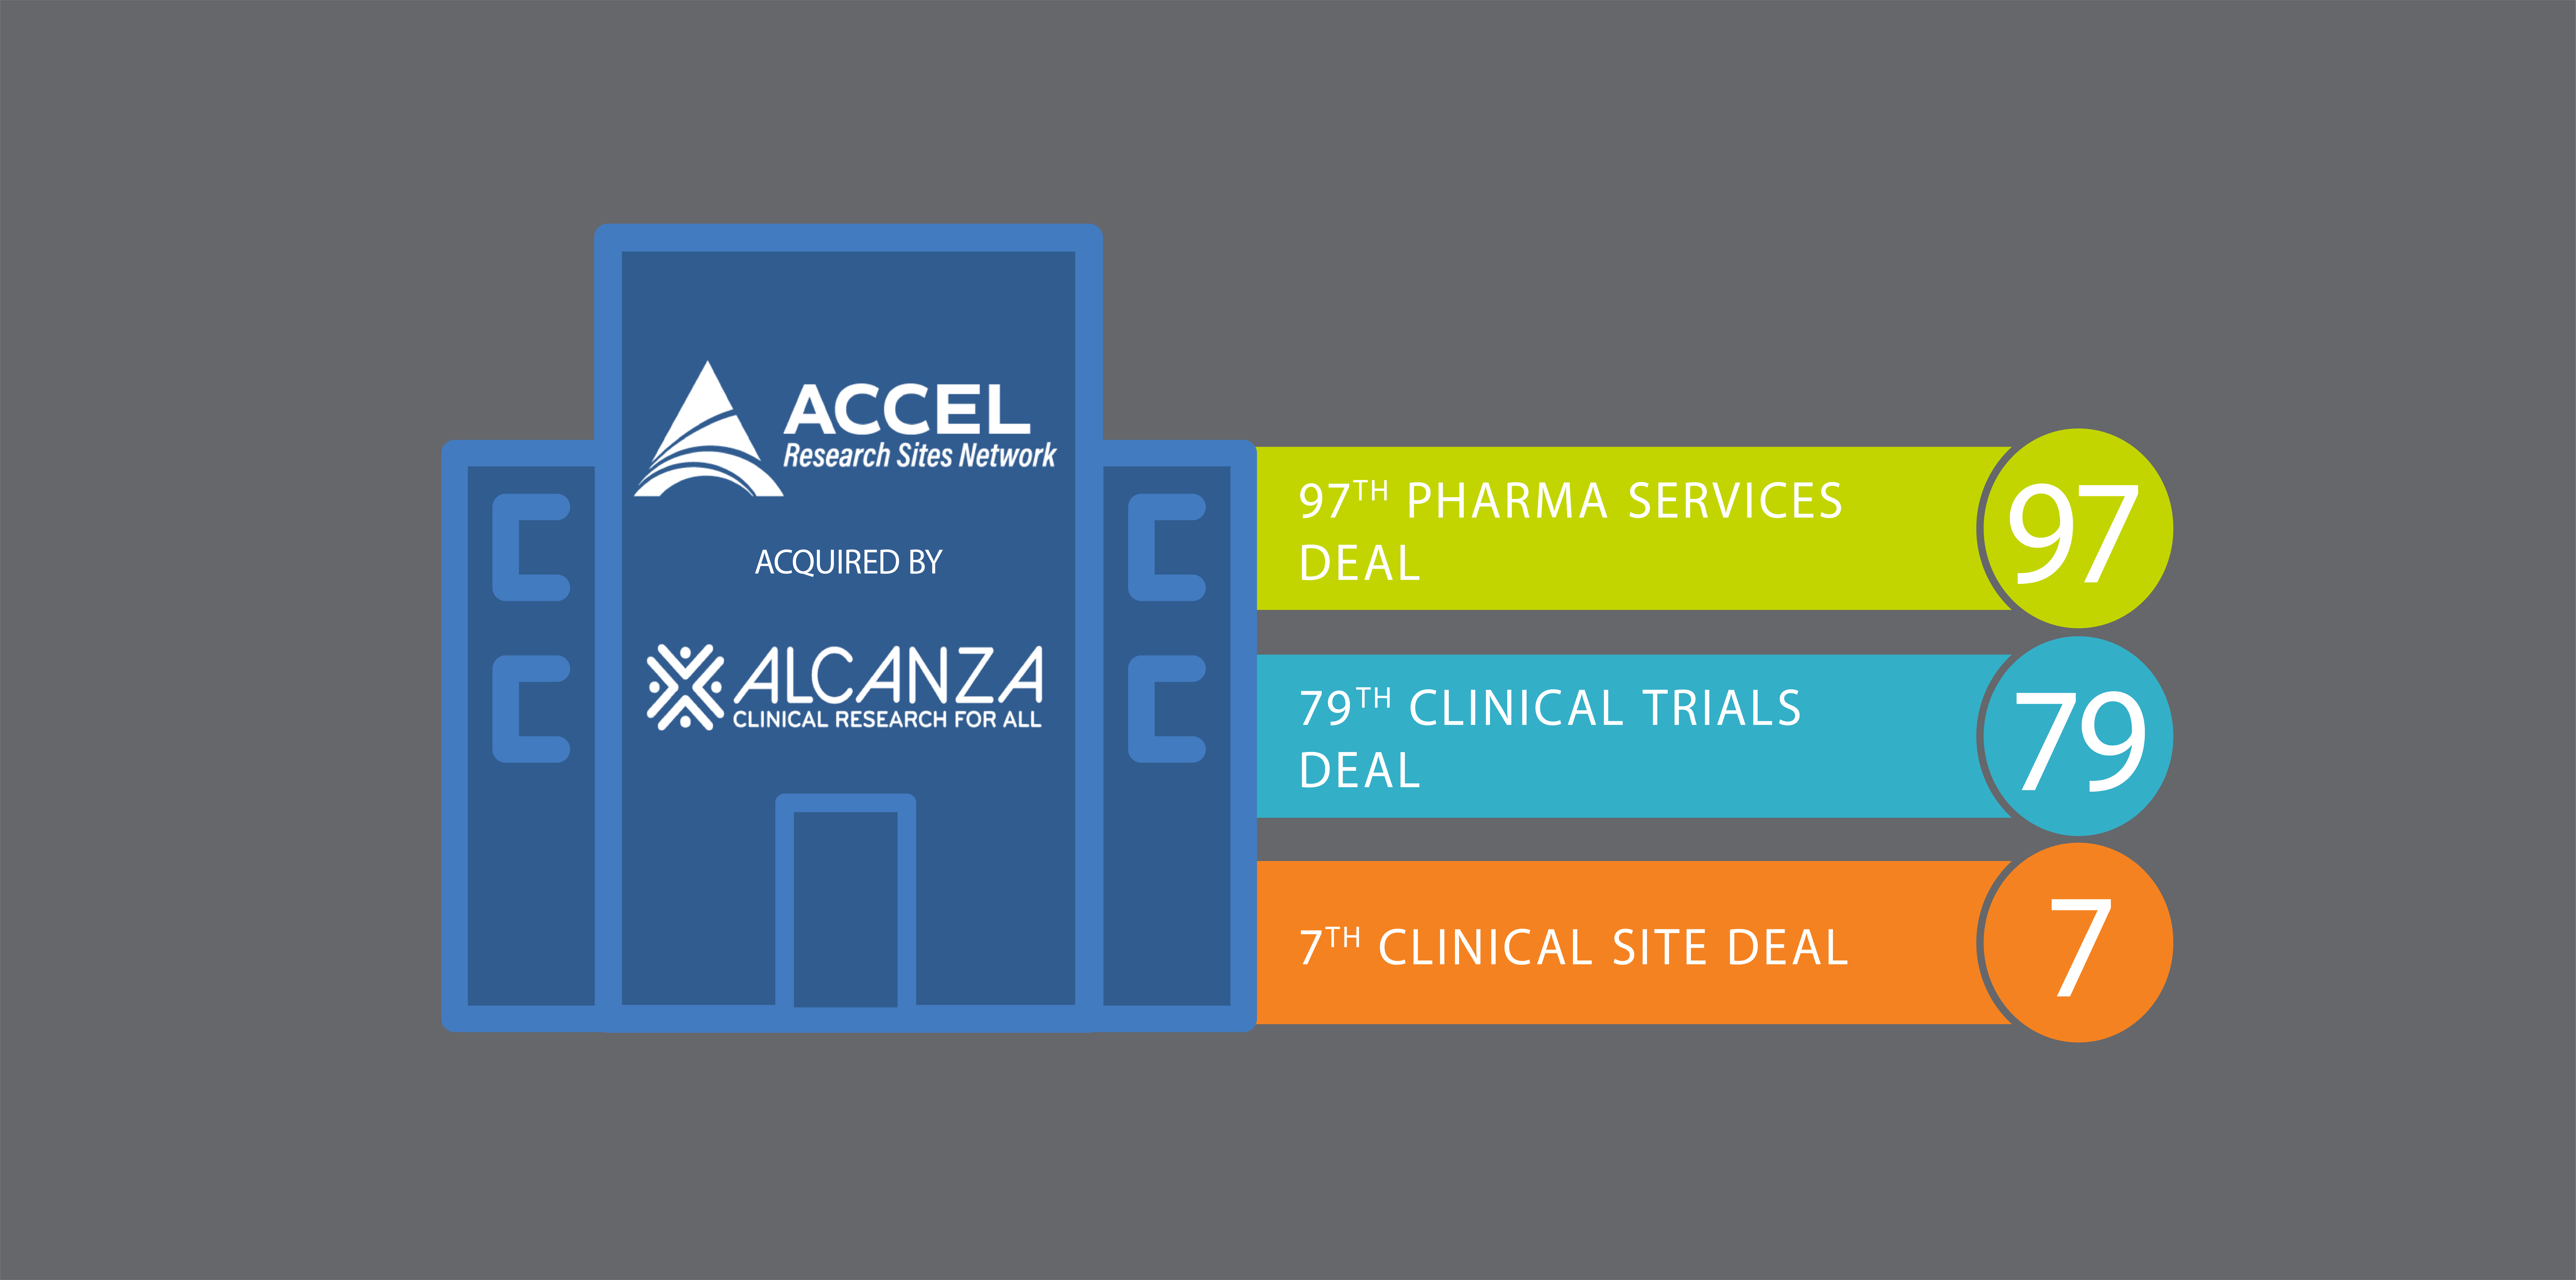 Accel Research Sites Network Acquired by Alcanza Clinical Research, a portfolio company of Martis Capital, to Expand its Clinical Trial Site Network and Clinical Trial Execution Capabilities